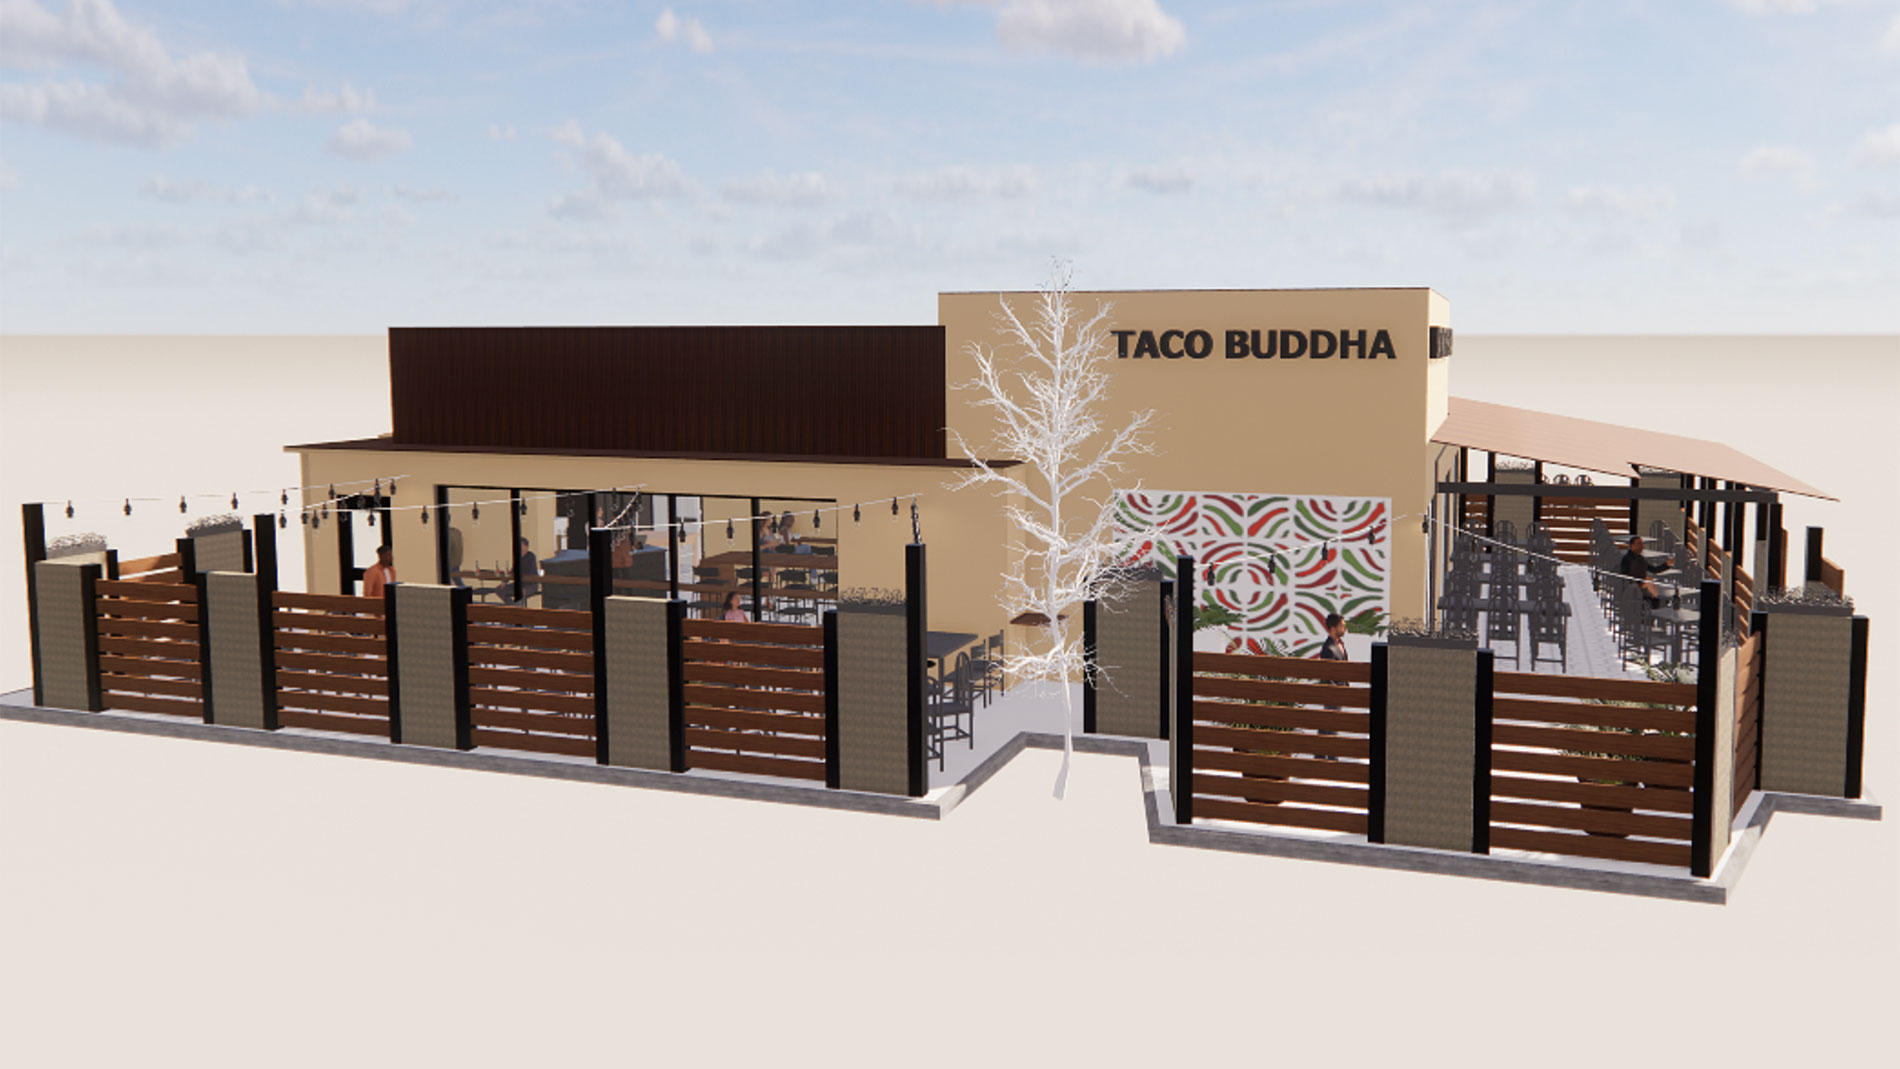 Taco Buddha is opening a location in Kirkwood next year